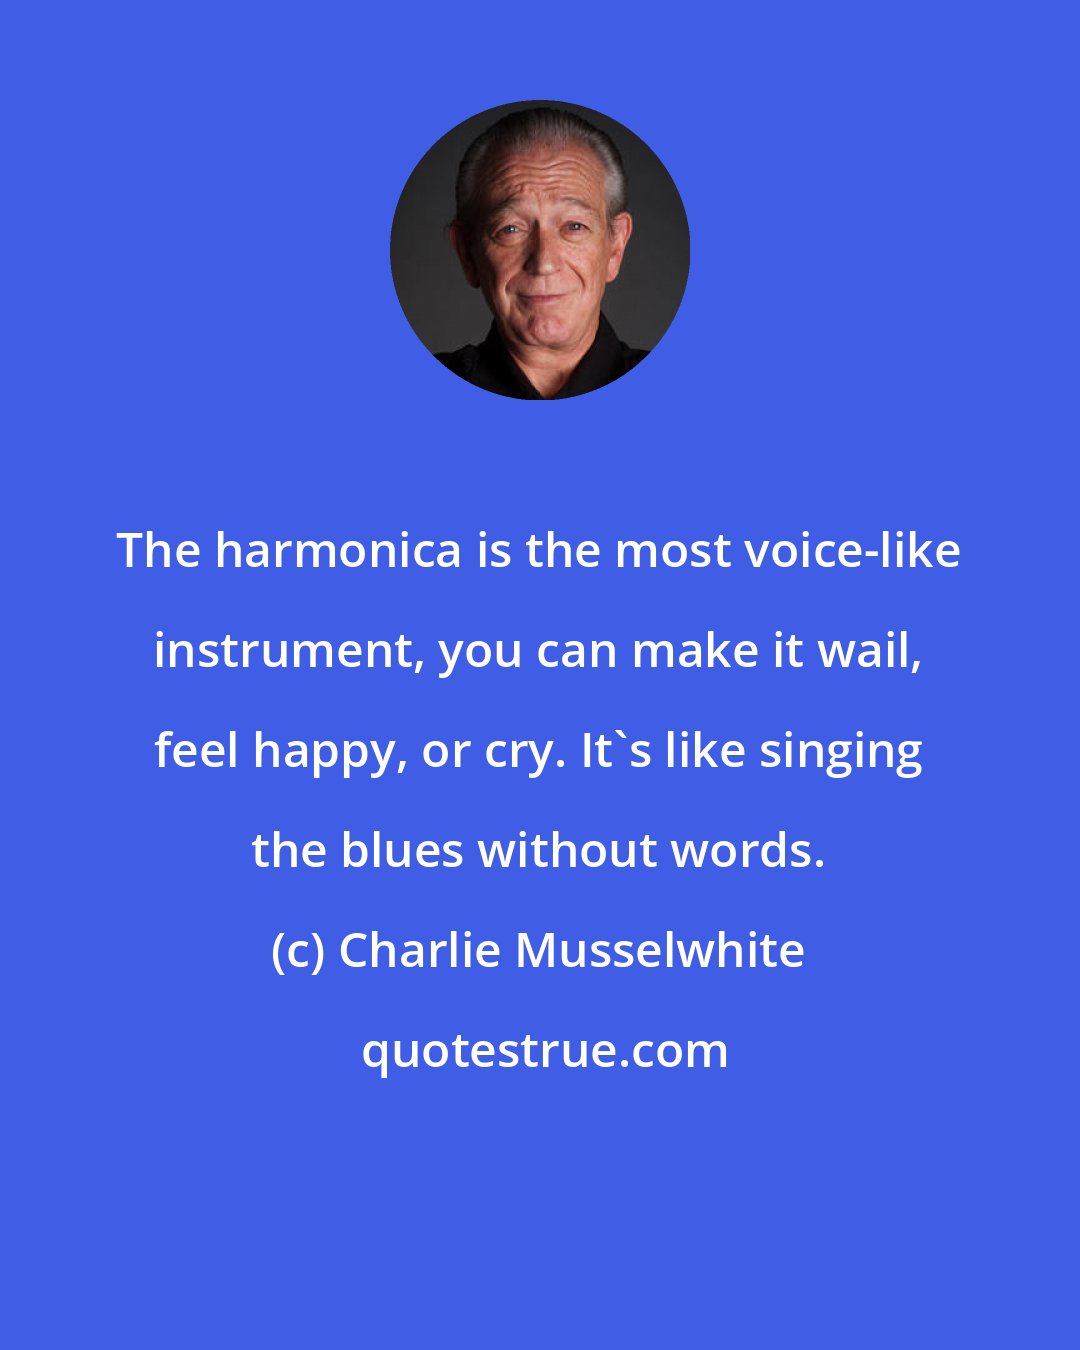 Charlie Musselwhite: The harmonica is the most voice-like instrument, you can make it wail, feel happy, or cry. It's like singing the blues without words.